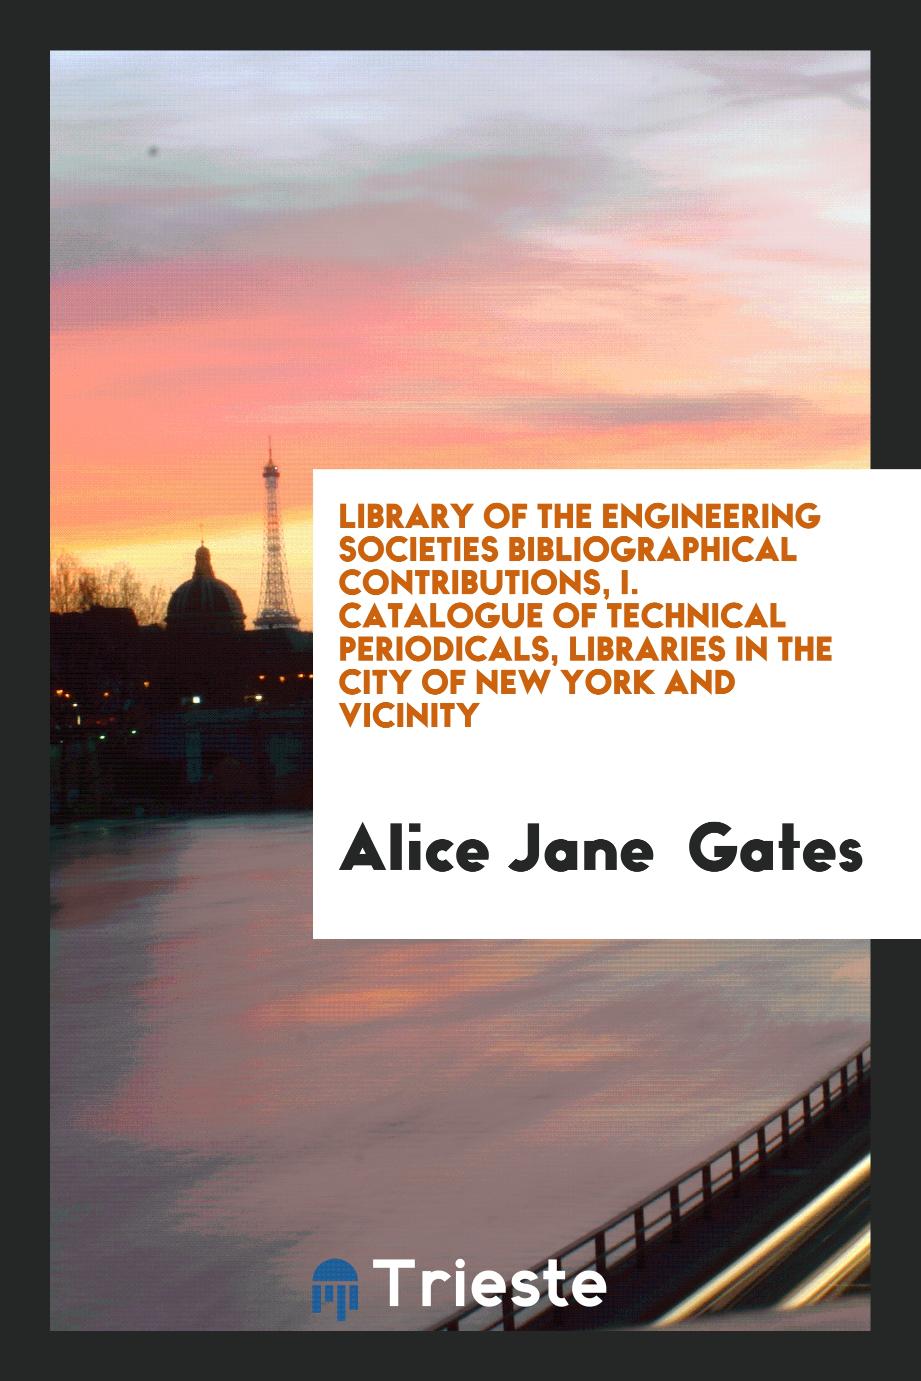 Library of the Engineering Societies Bibliographical Contributions, I. Catalogue of Technical Periodicals, Libraries in the City of New York and Vicinity